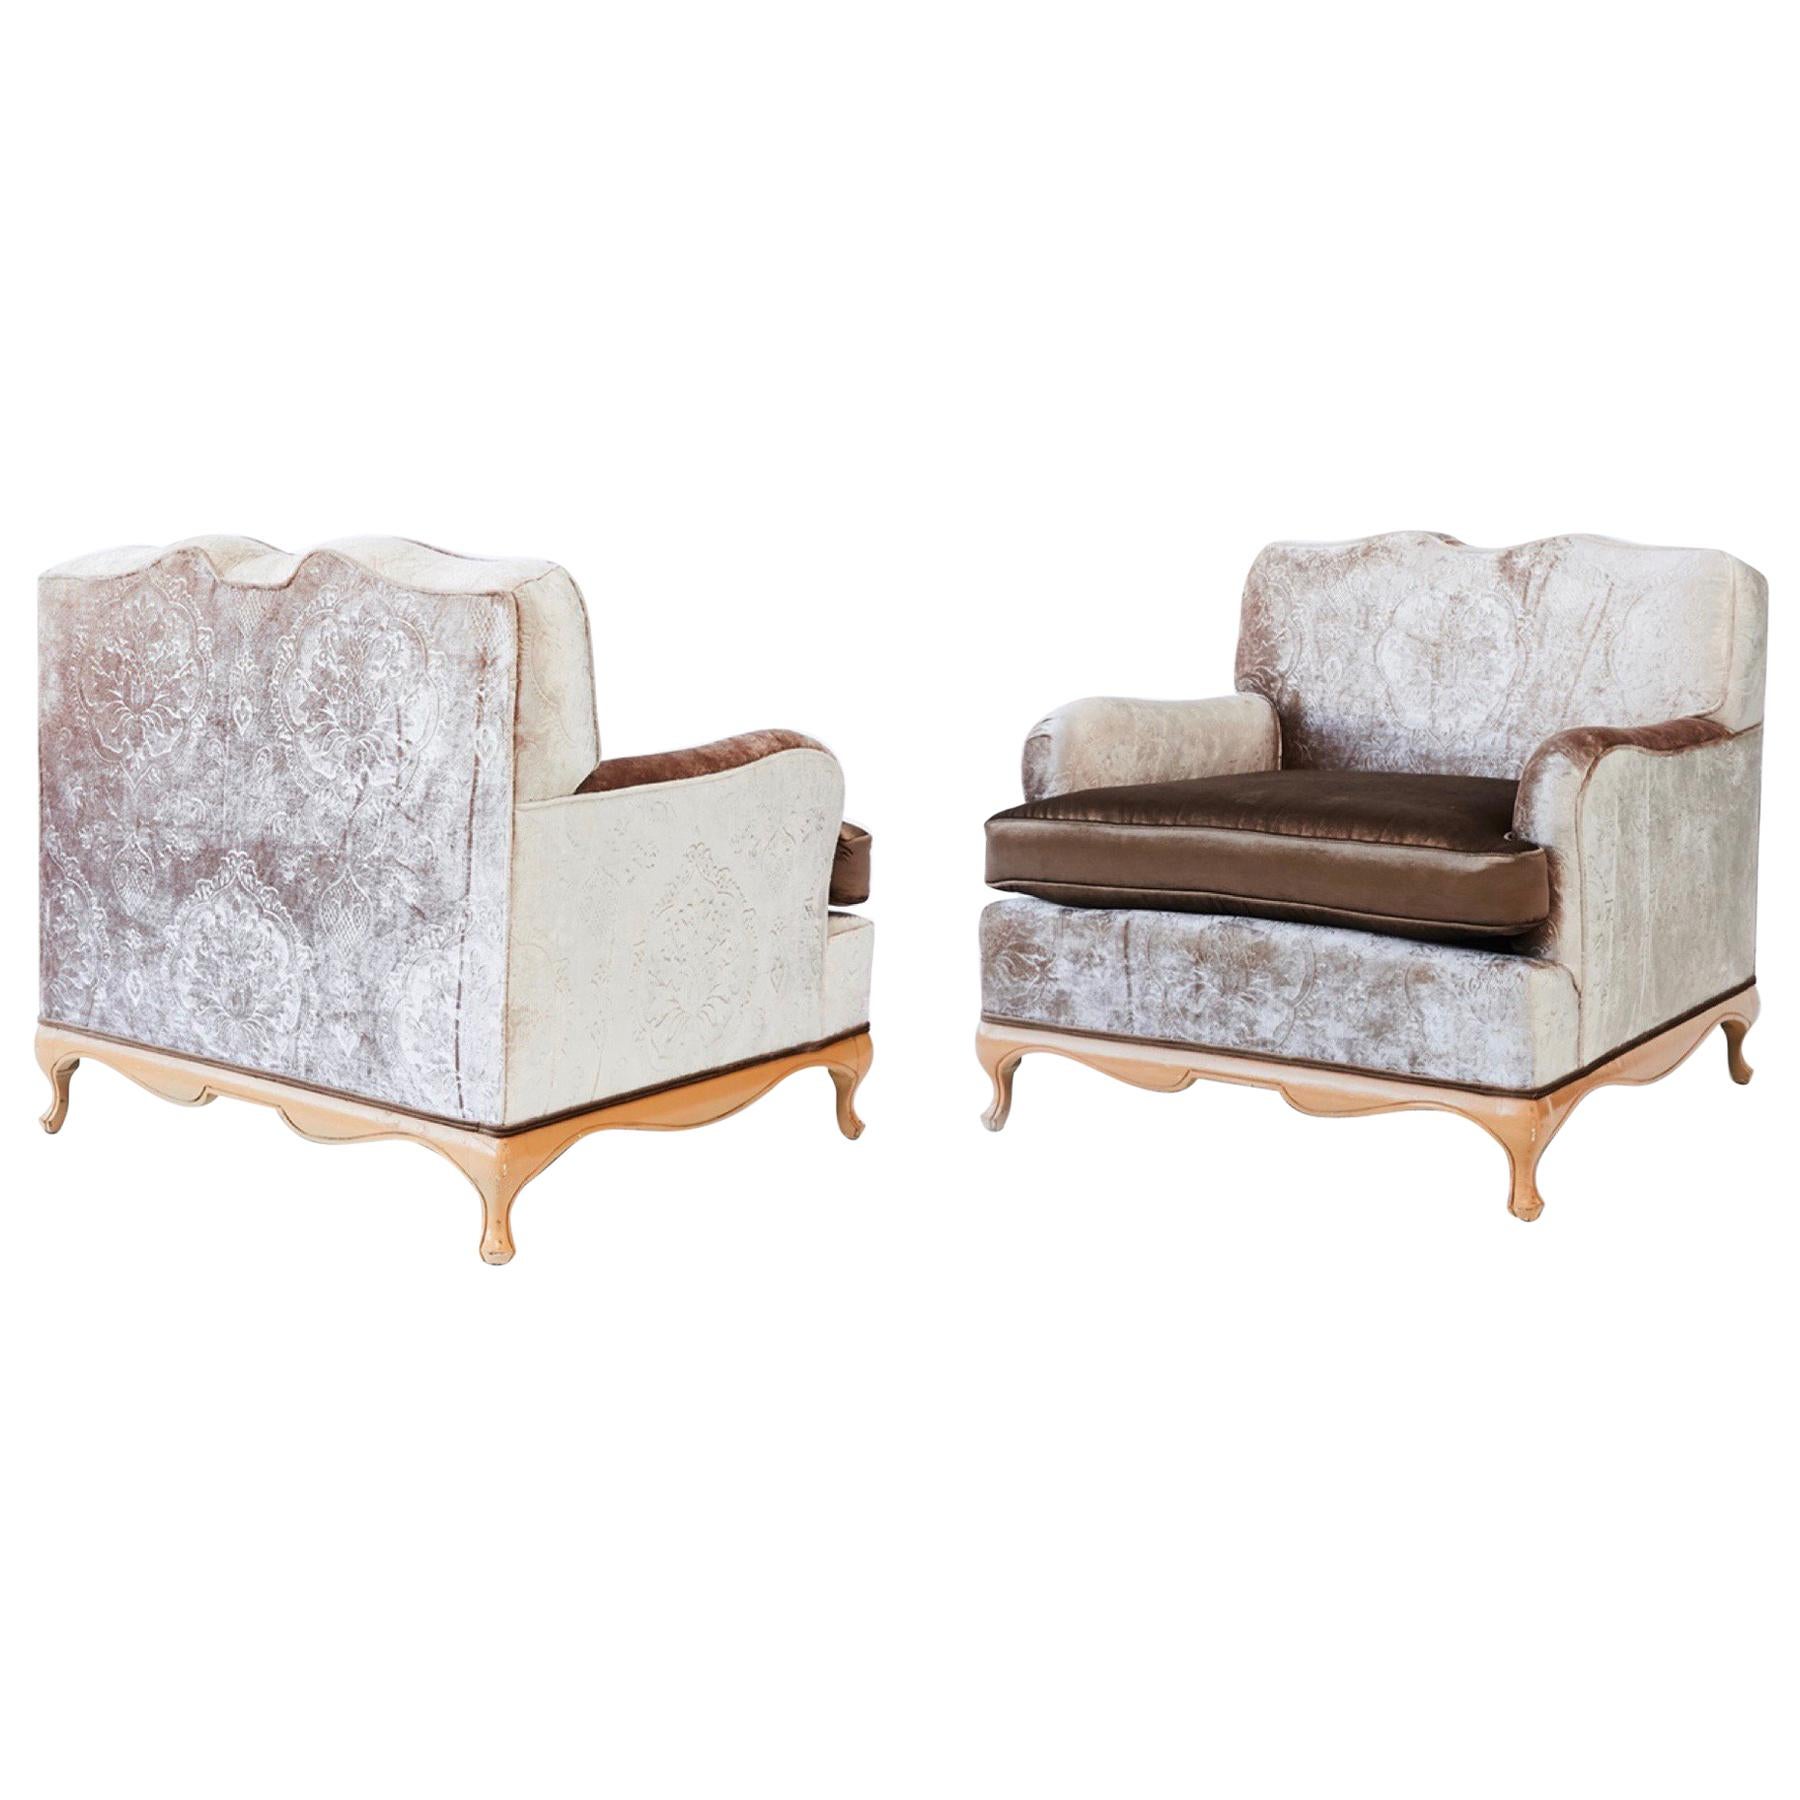 Pair of Syrie Maugham Style Club Chairs, circa 1940